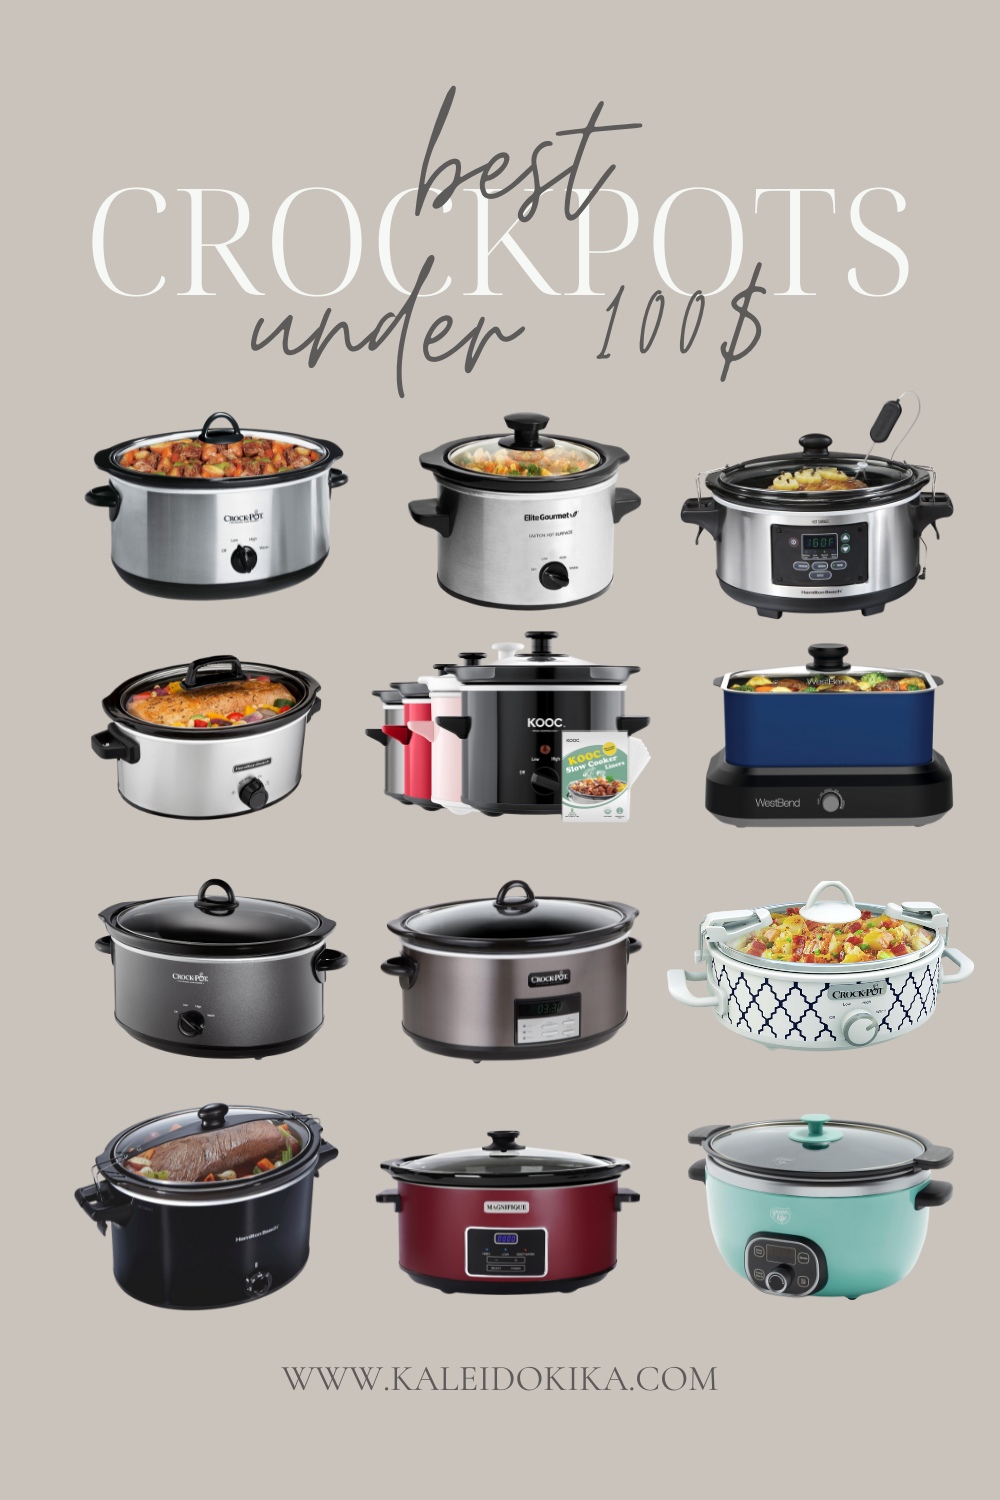 Image showing 12 crockpots and slow cookers underneath 100$